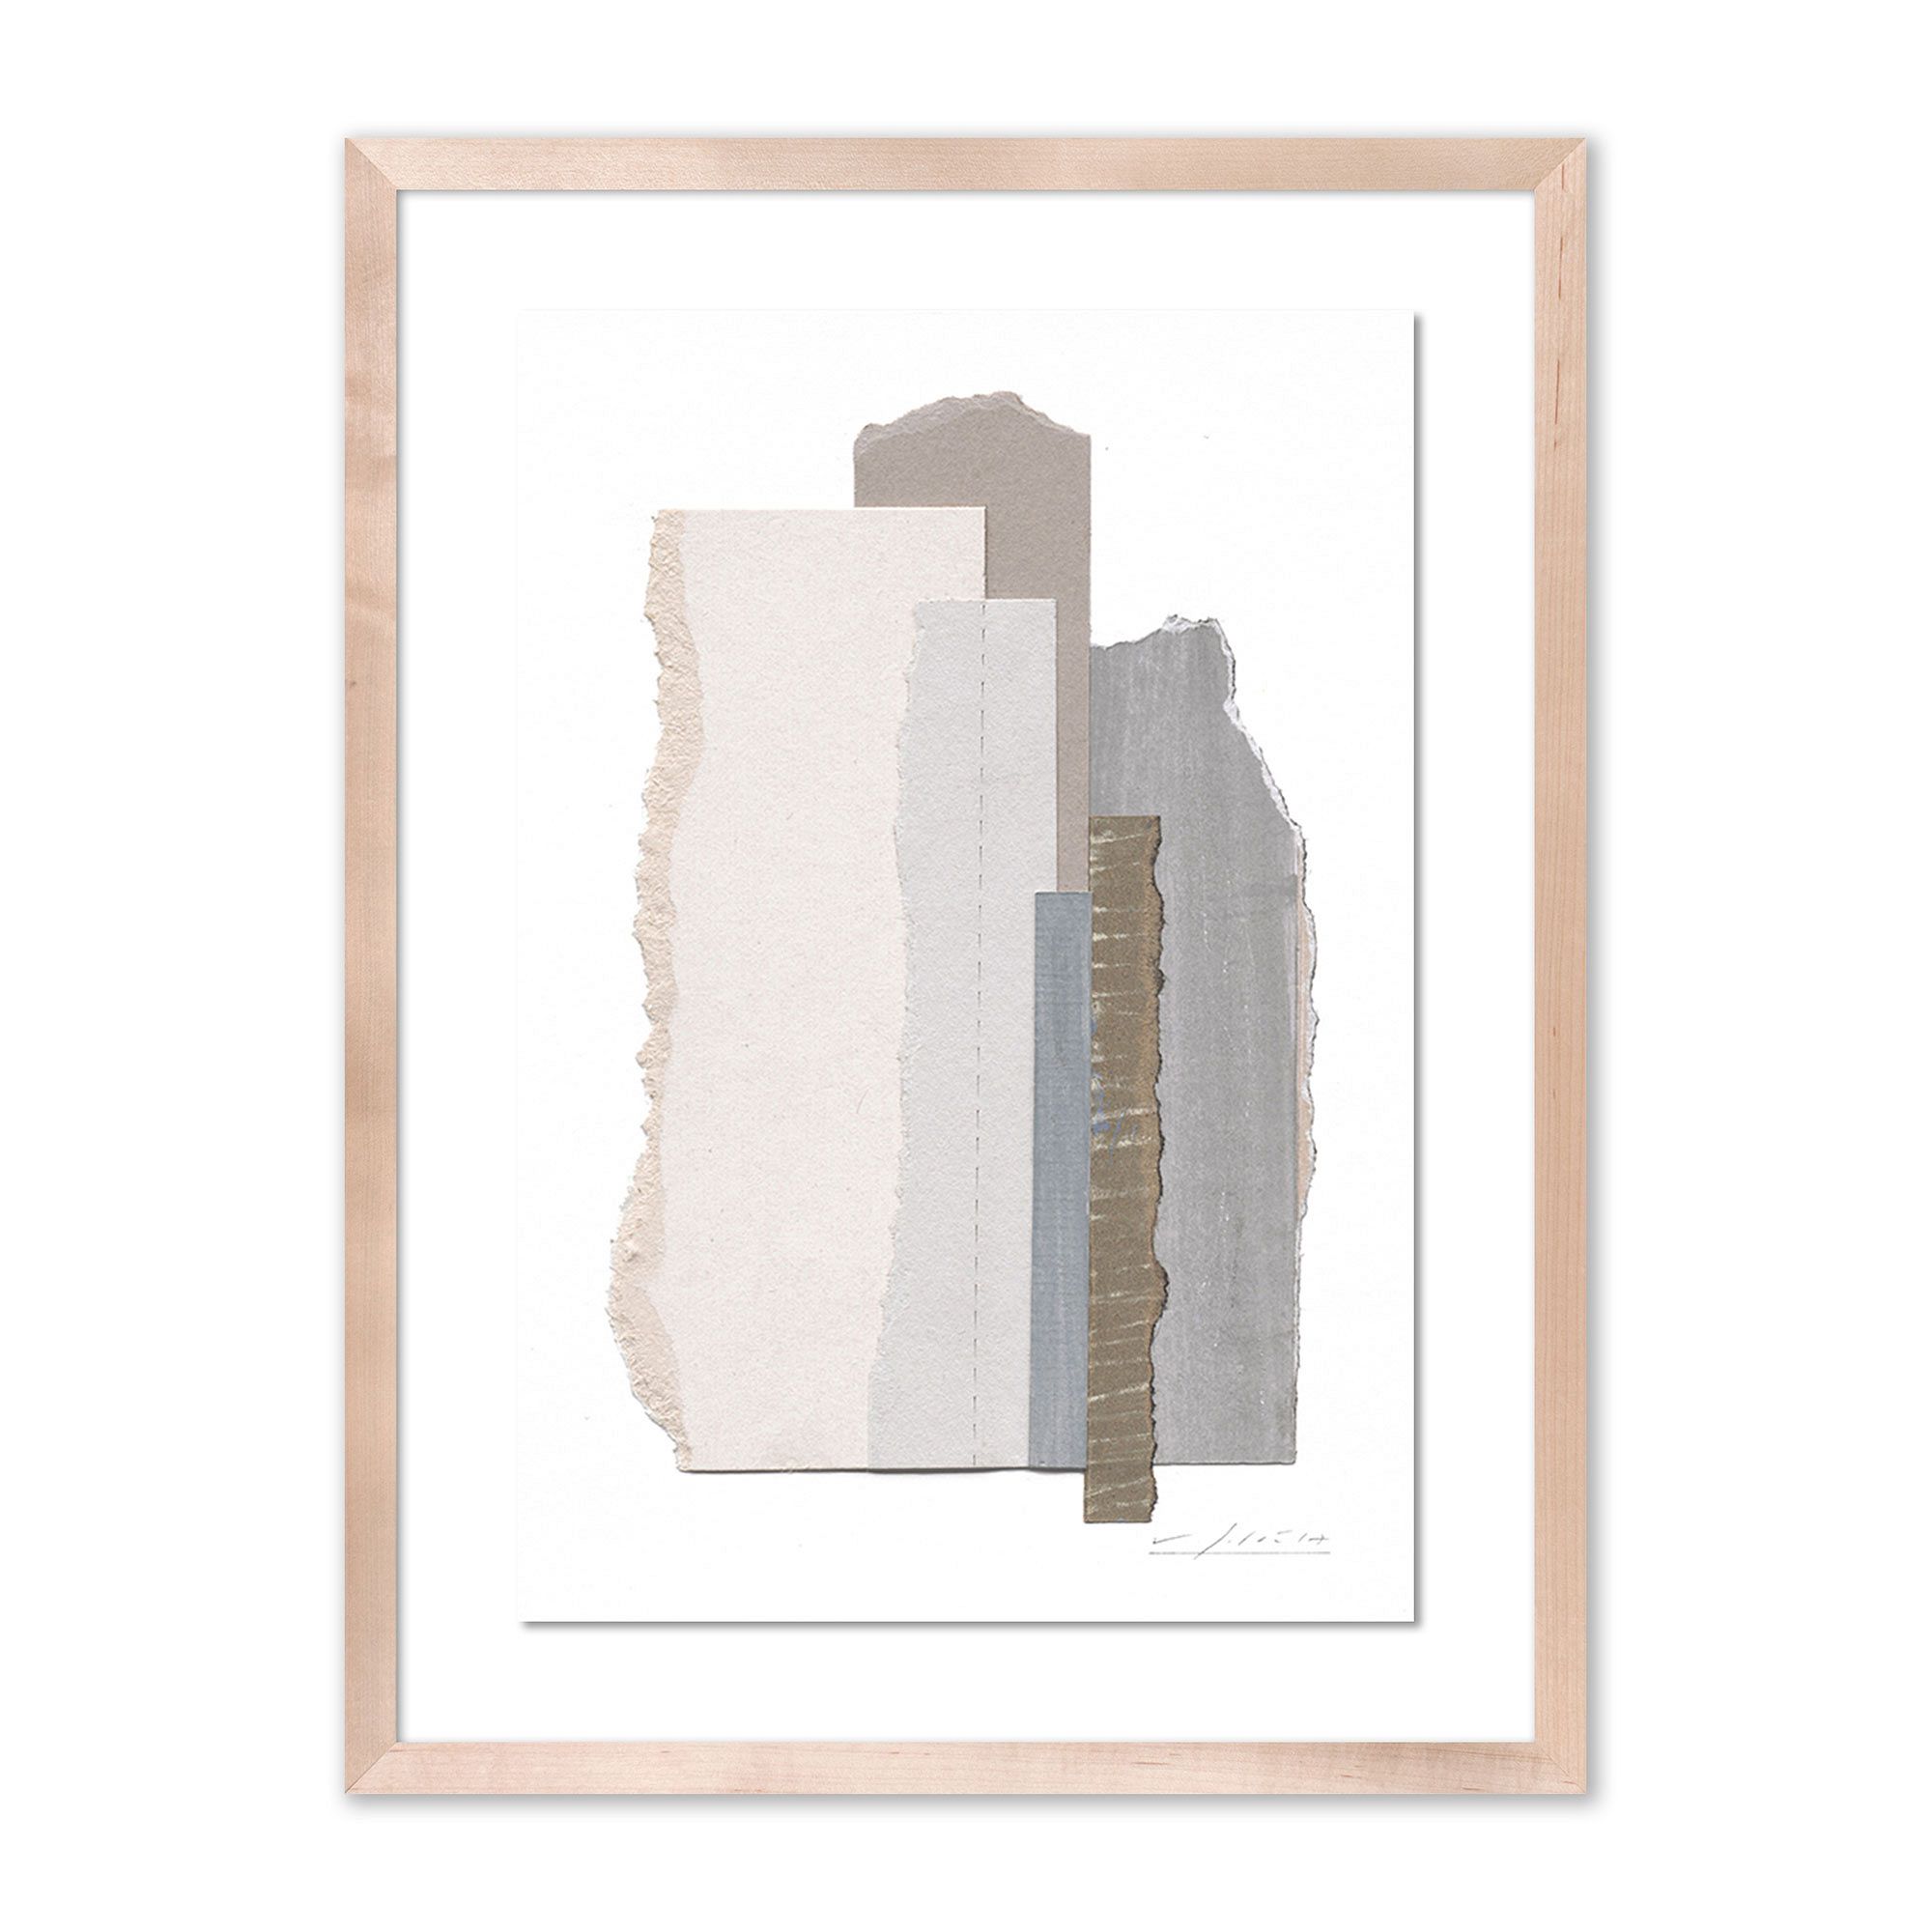 Poetic Architectures No. Framed Wall Art by Valeria Sidanez | West Elm